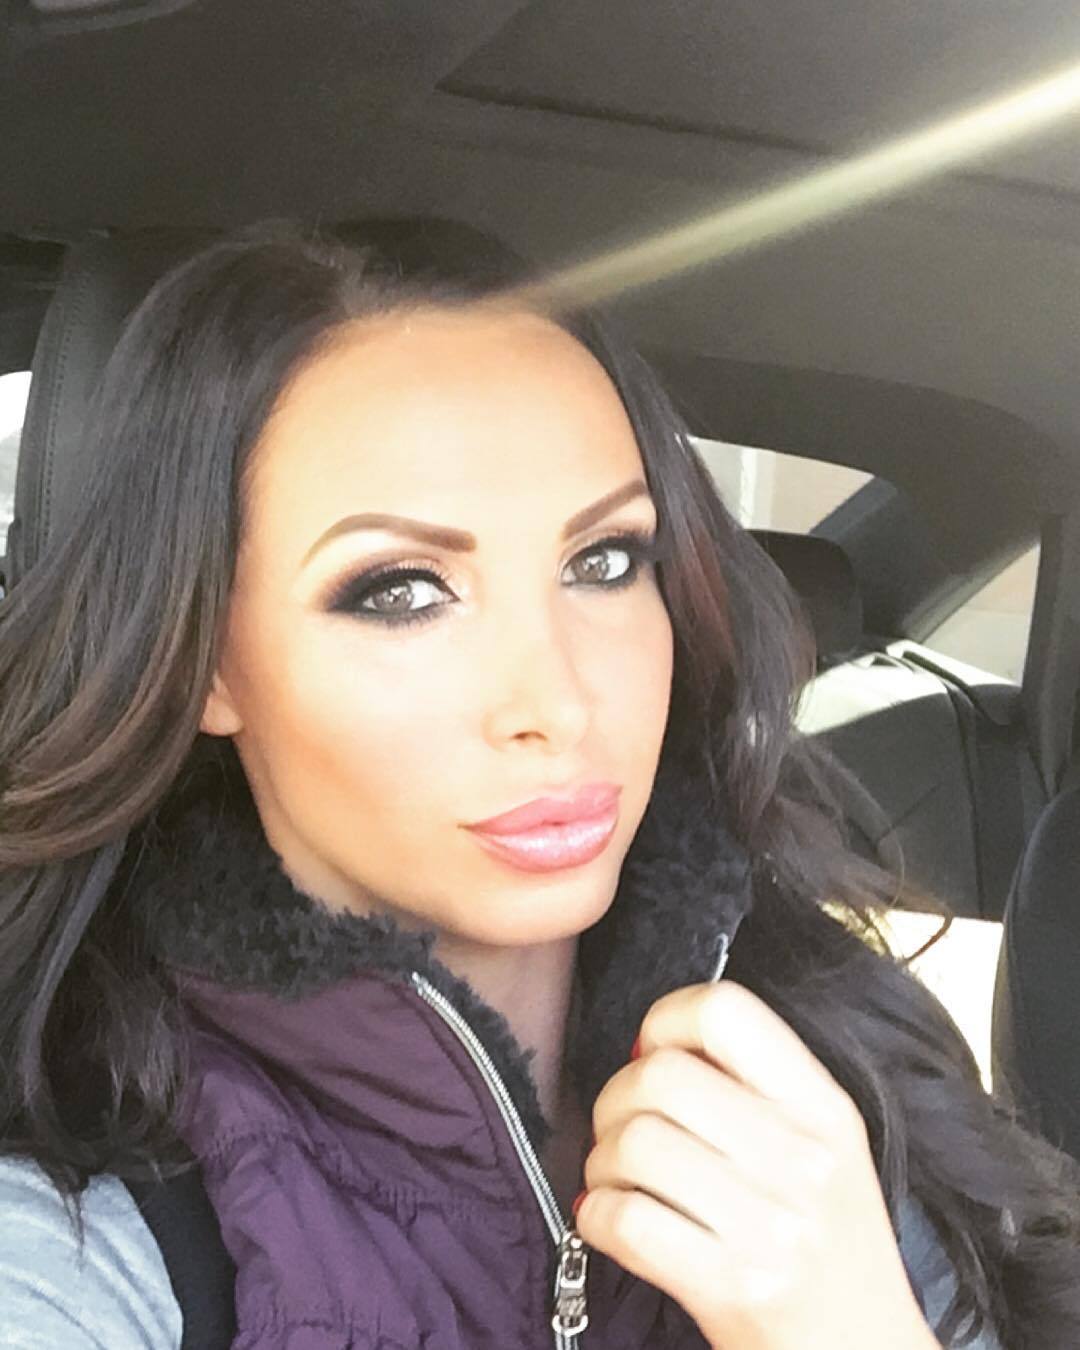 On my way to set.  #BenzMafia :: make up by @makeupbypeggy by nikkibenz